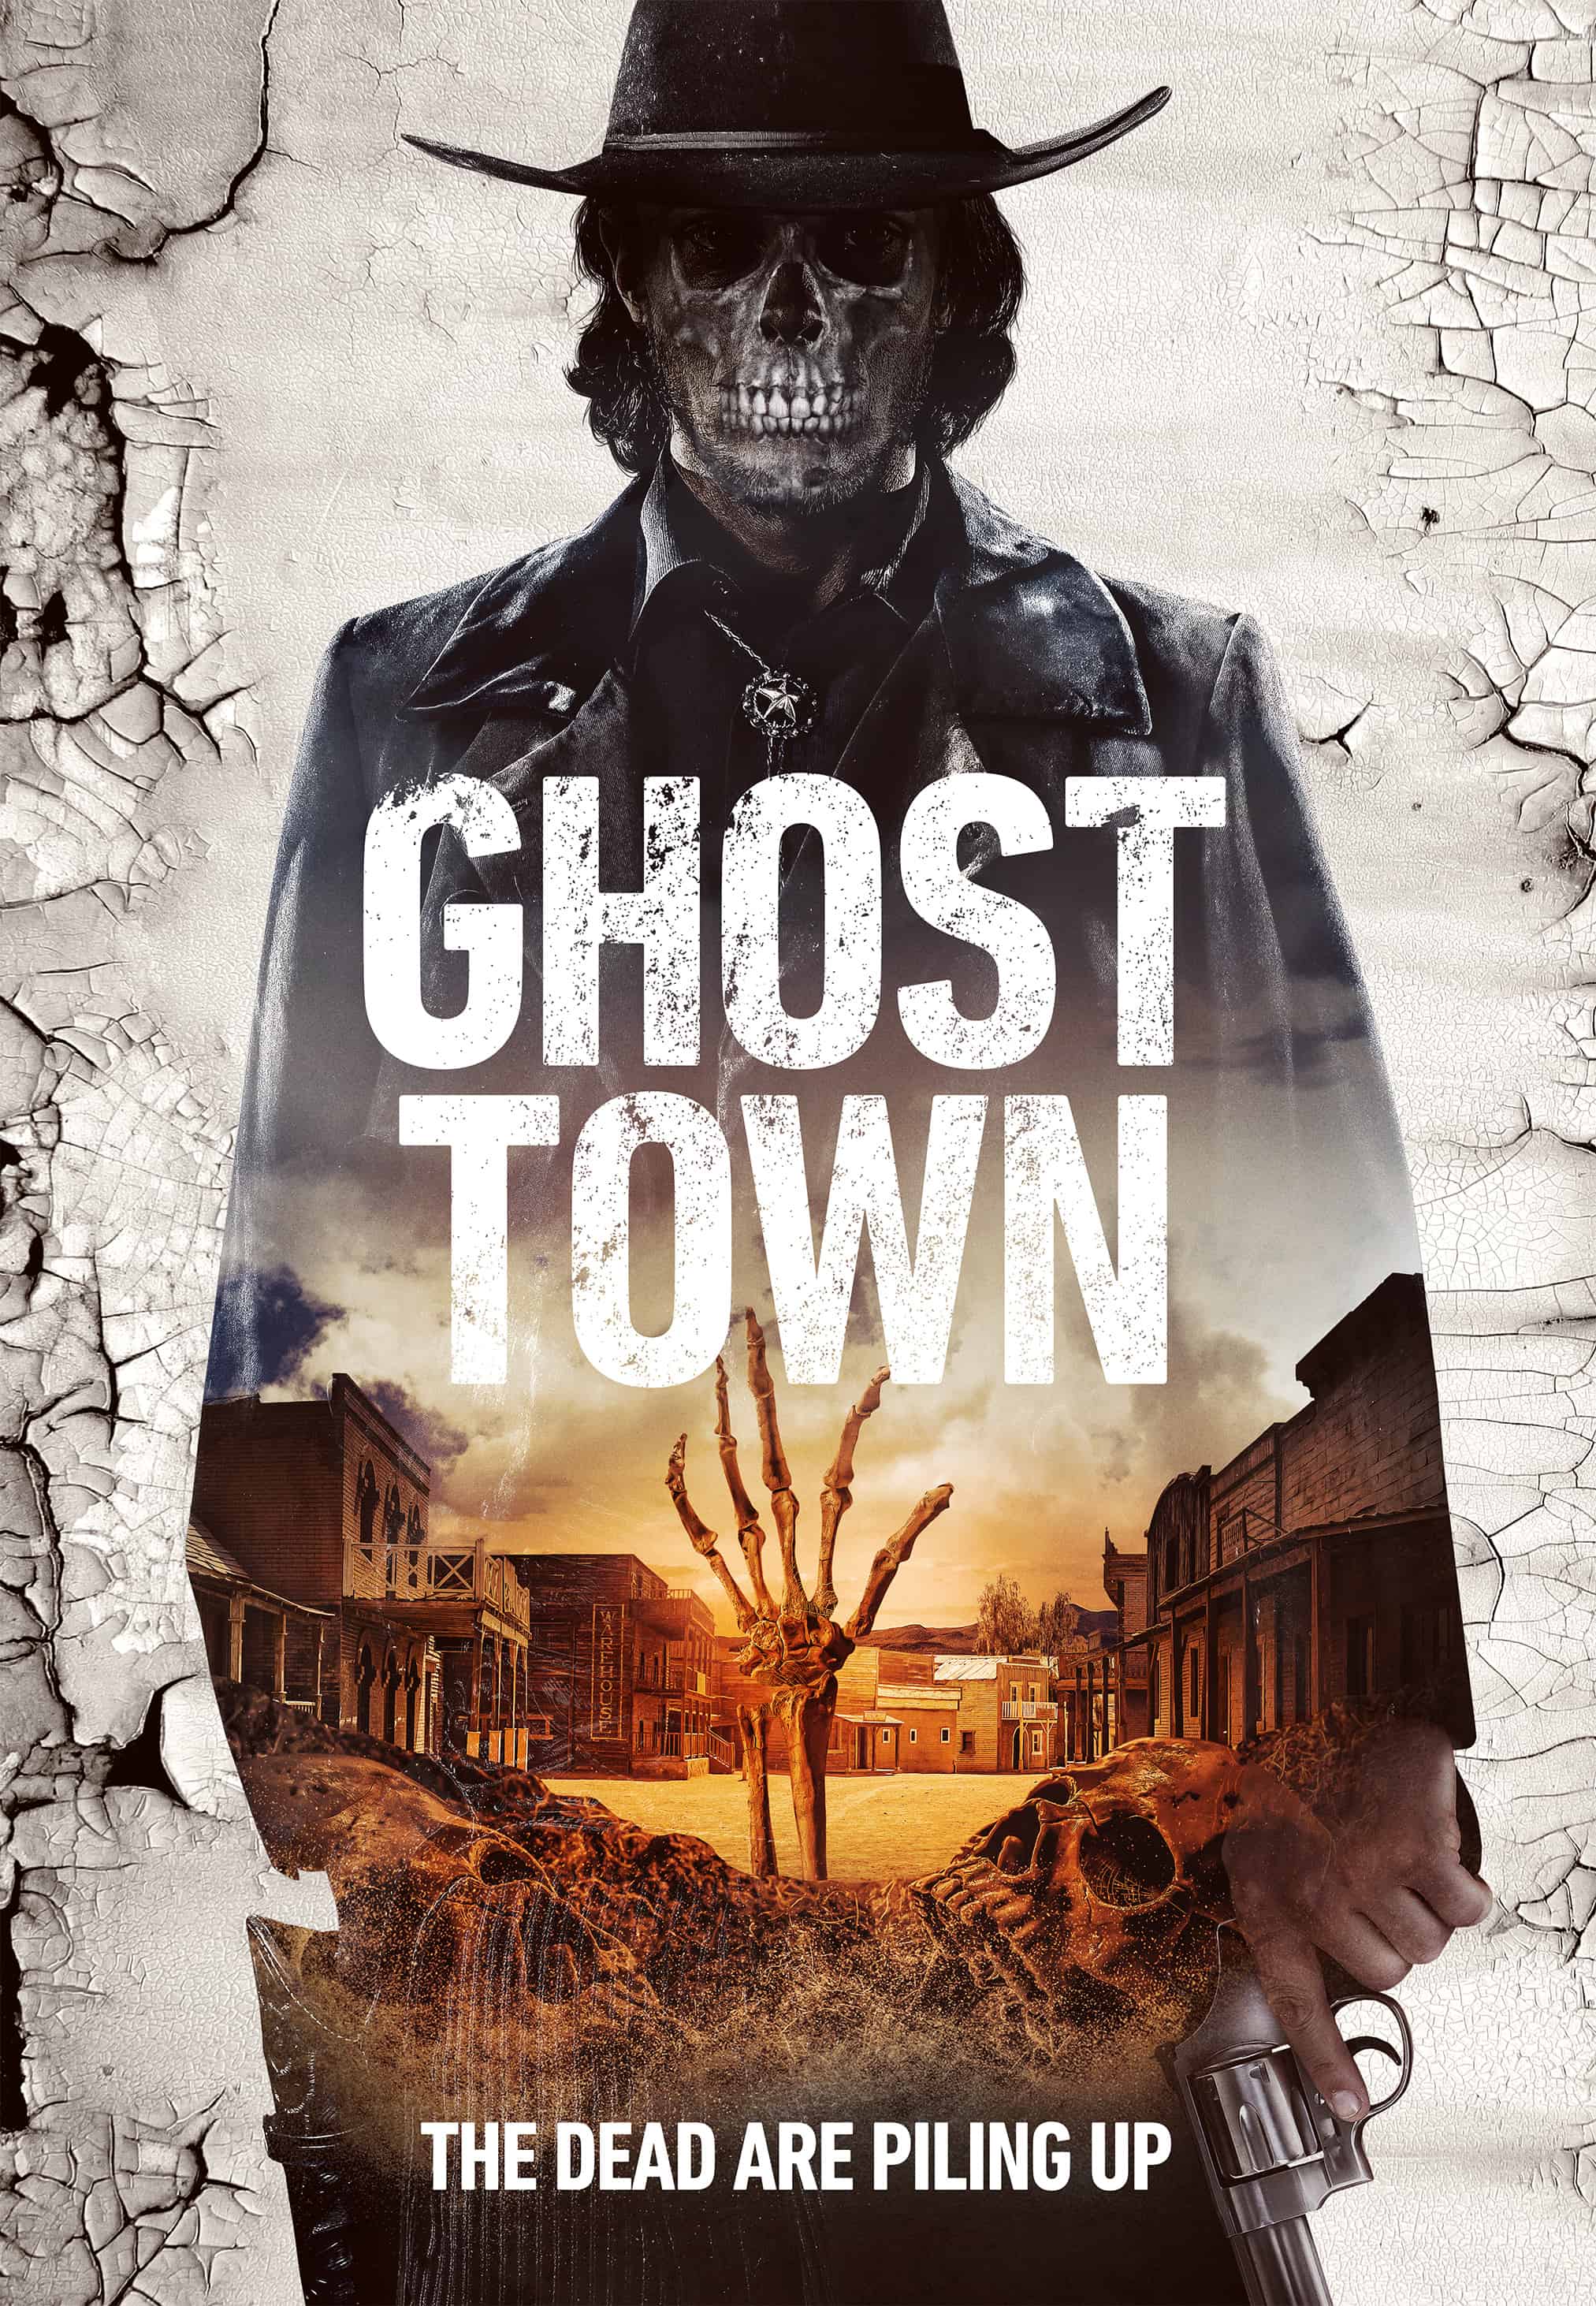 Ghost Town offers up a poster and trailer arrives March 7th 45